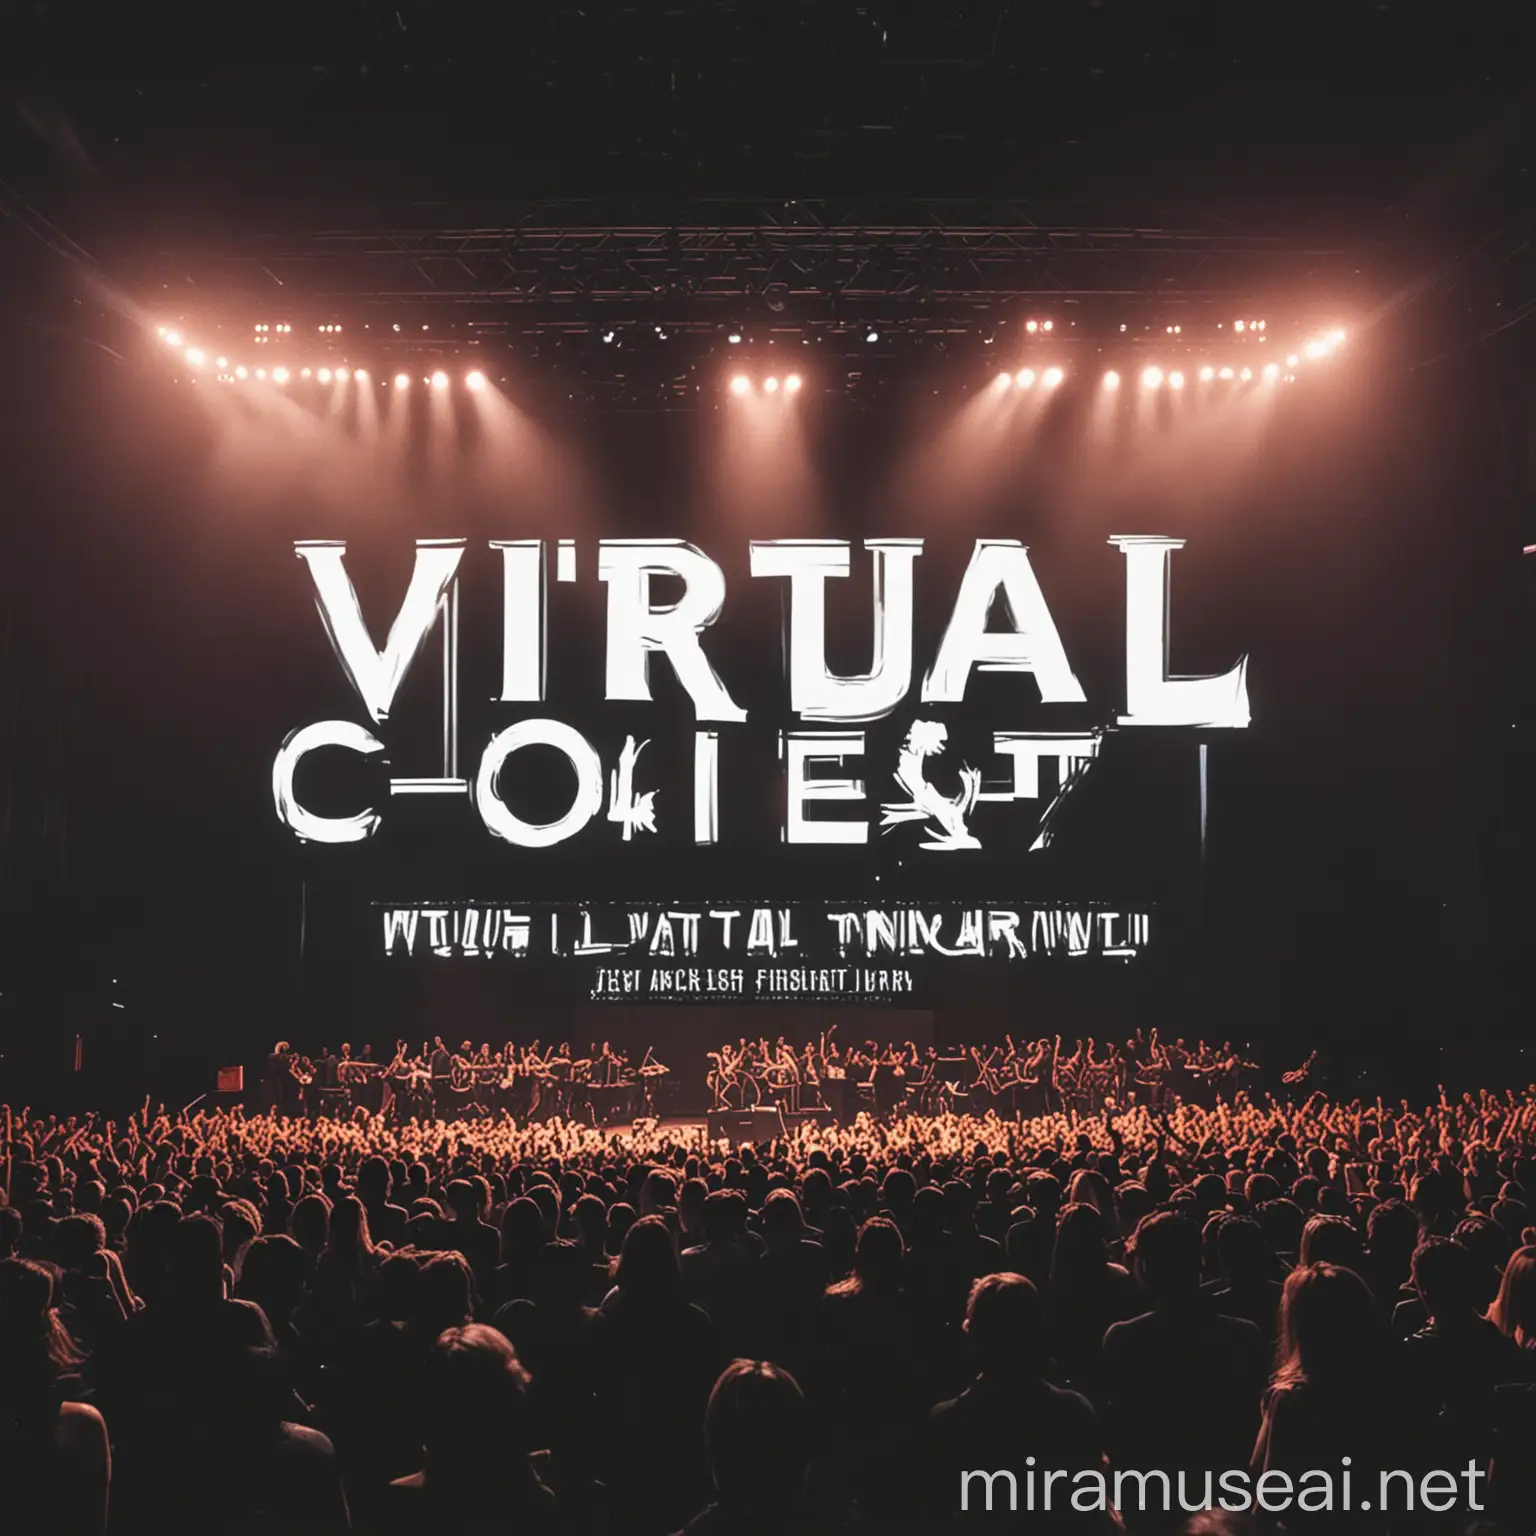 Immersive Virtual Concert Experience with Futuristic Visuals